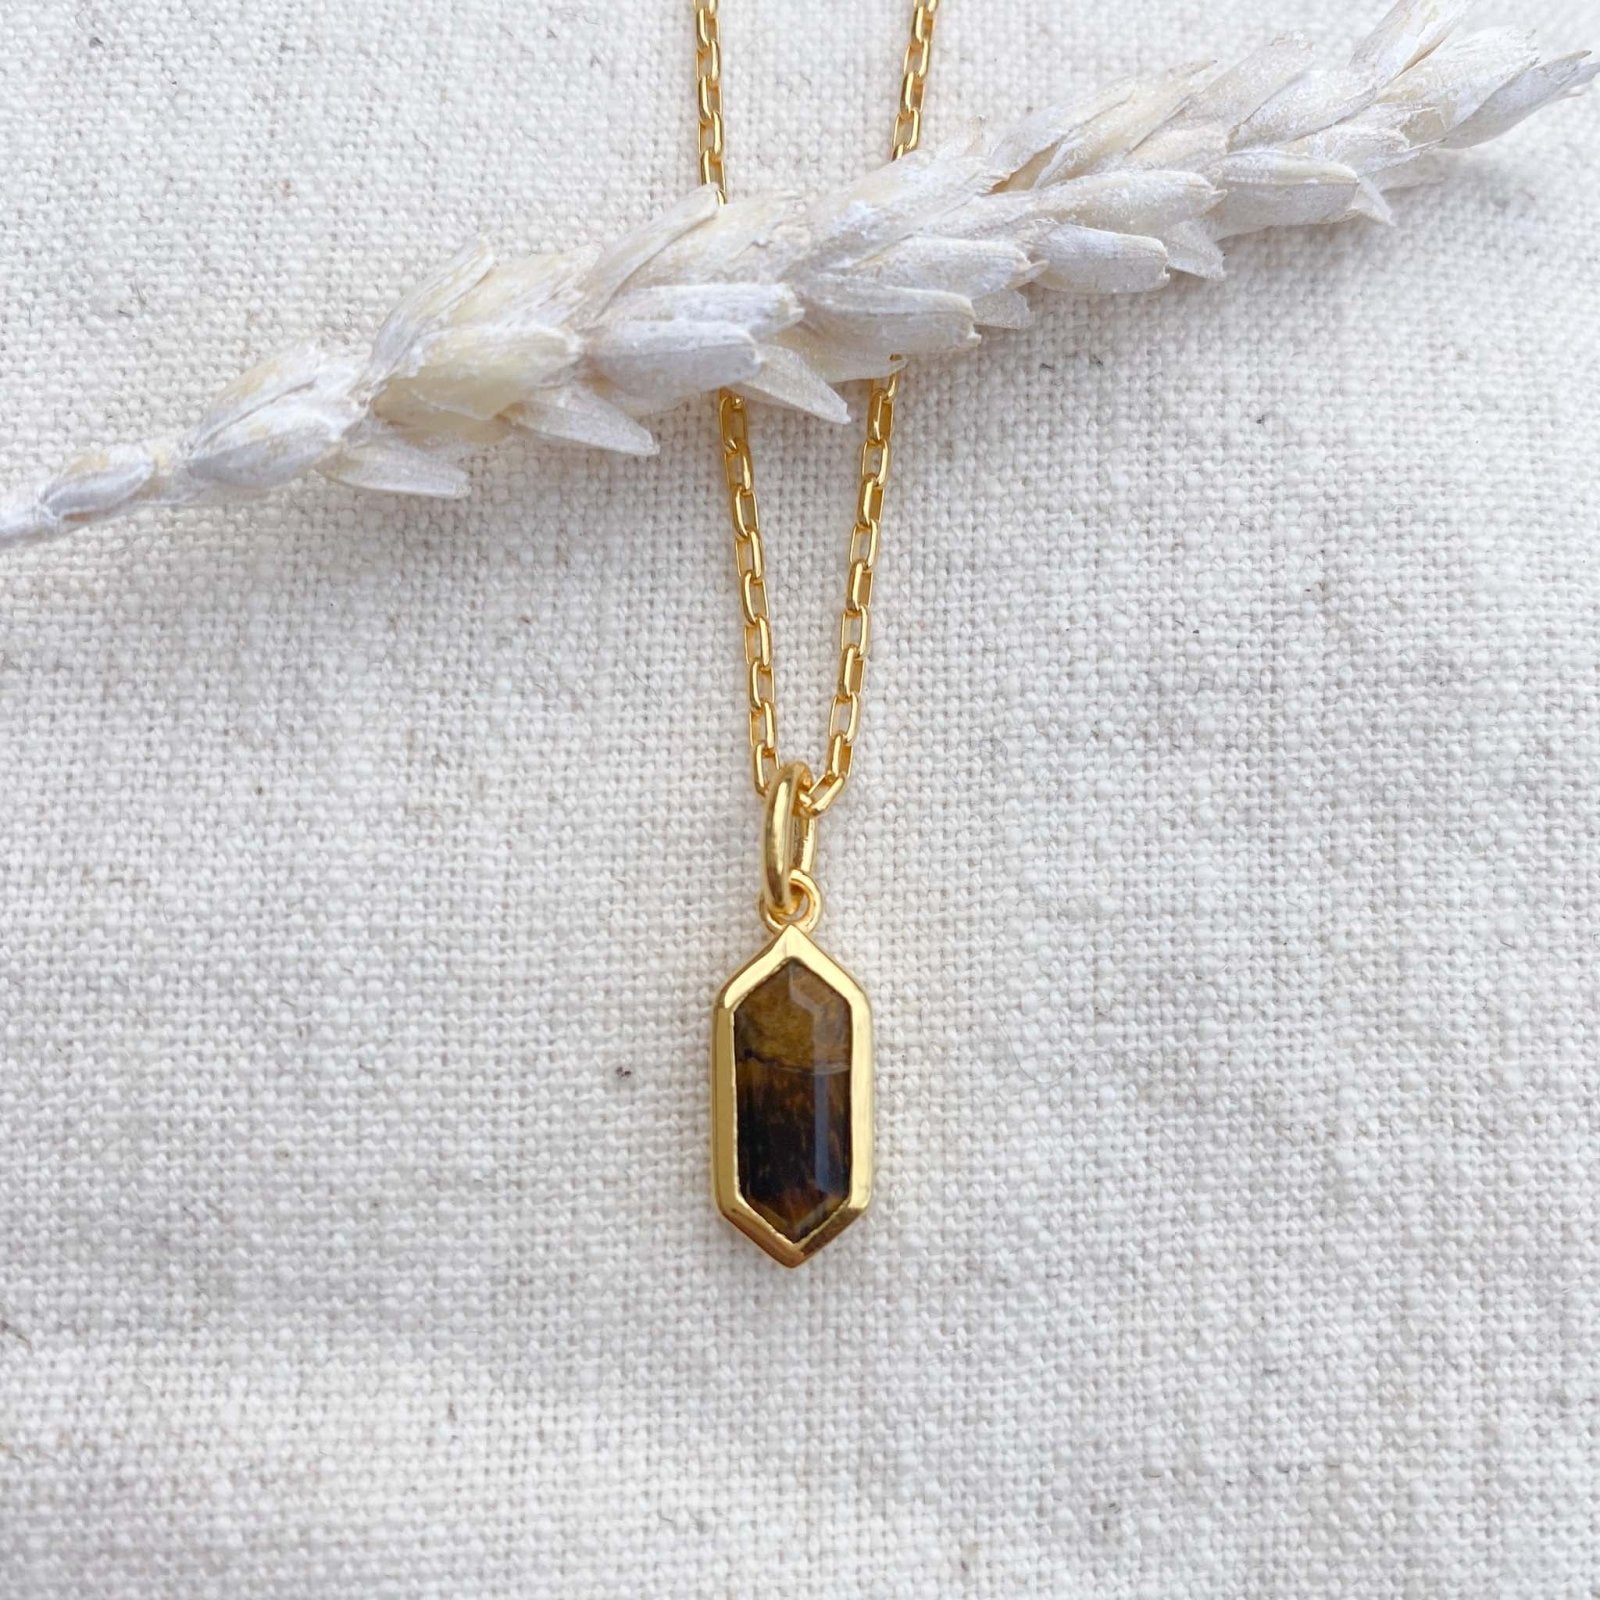 LILE TIGERS EYE GOLD NECKLACE - Honoura